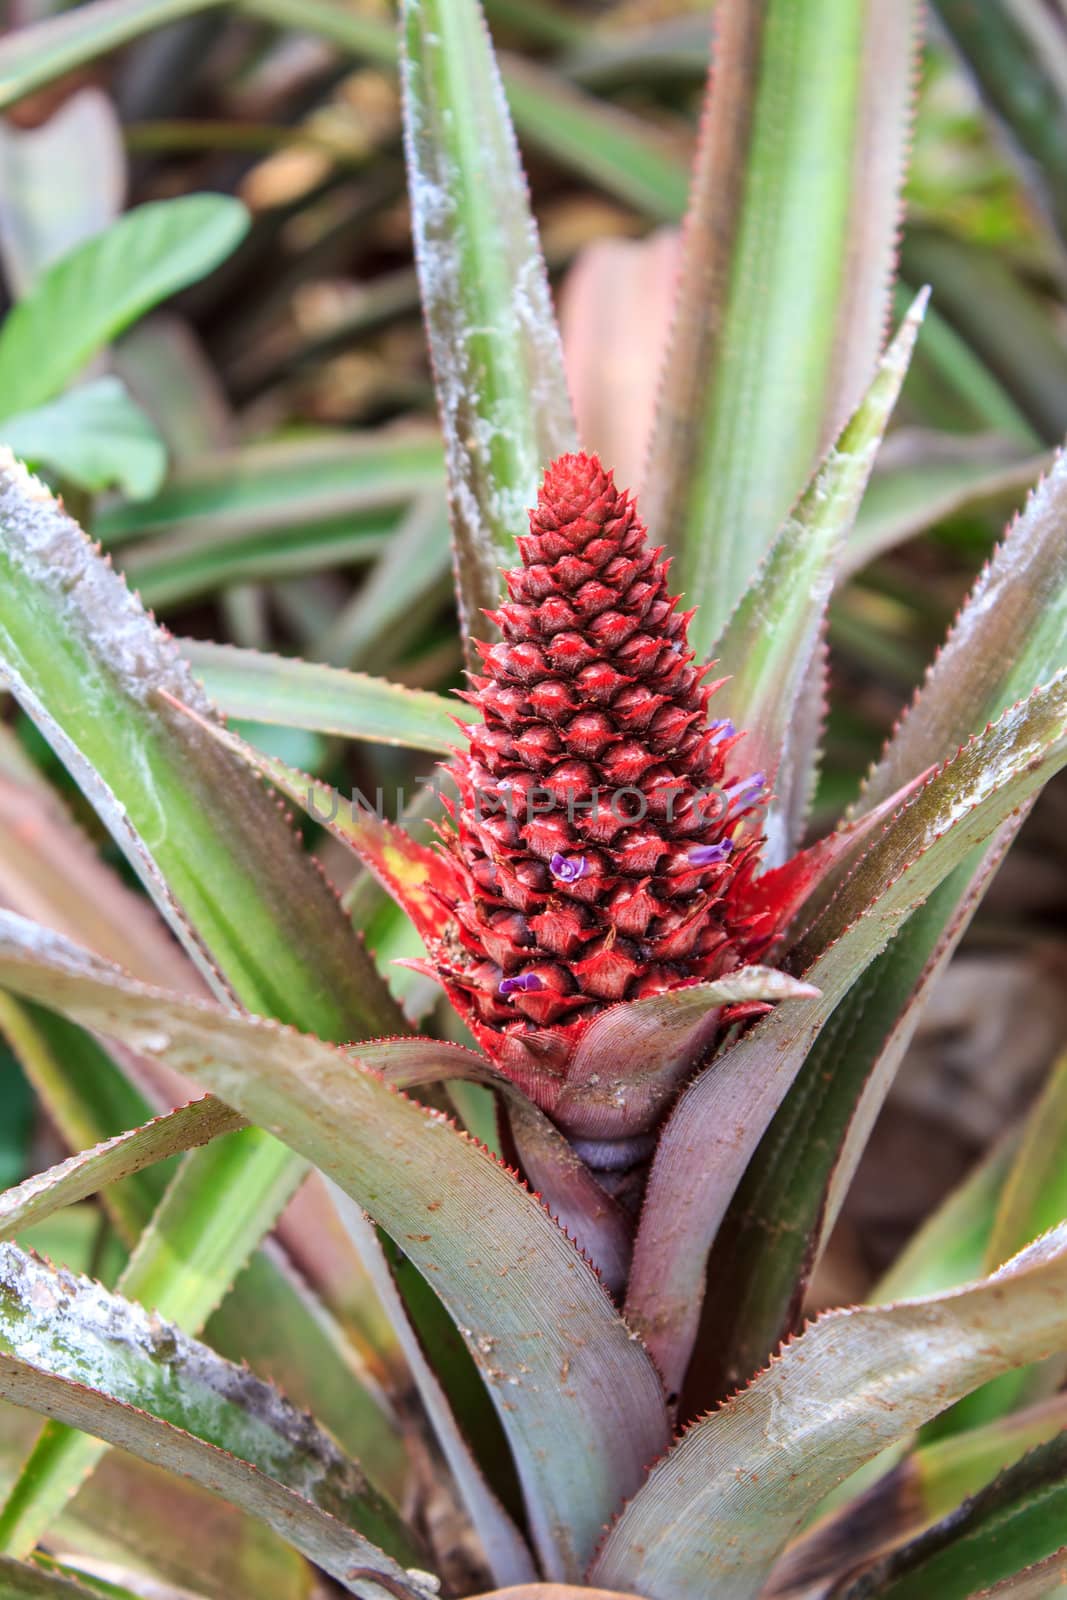 Colorful of the little pineapple on its parent plant.